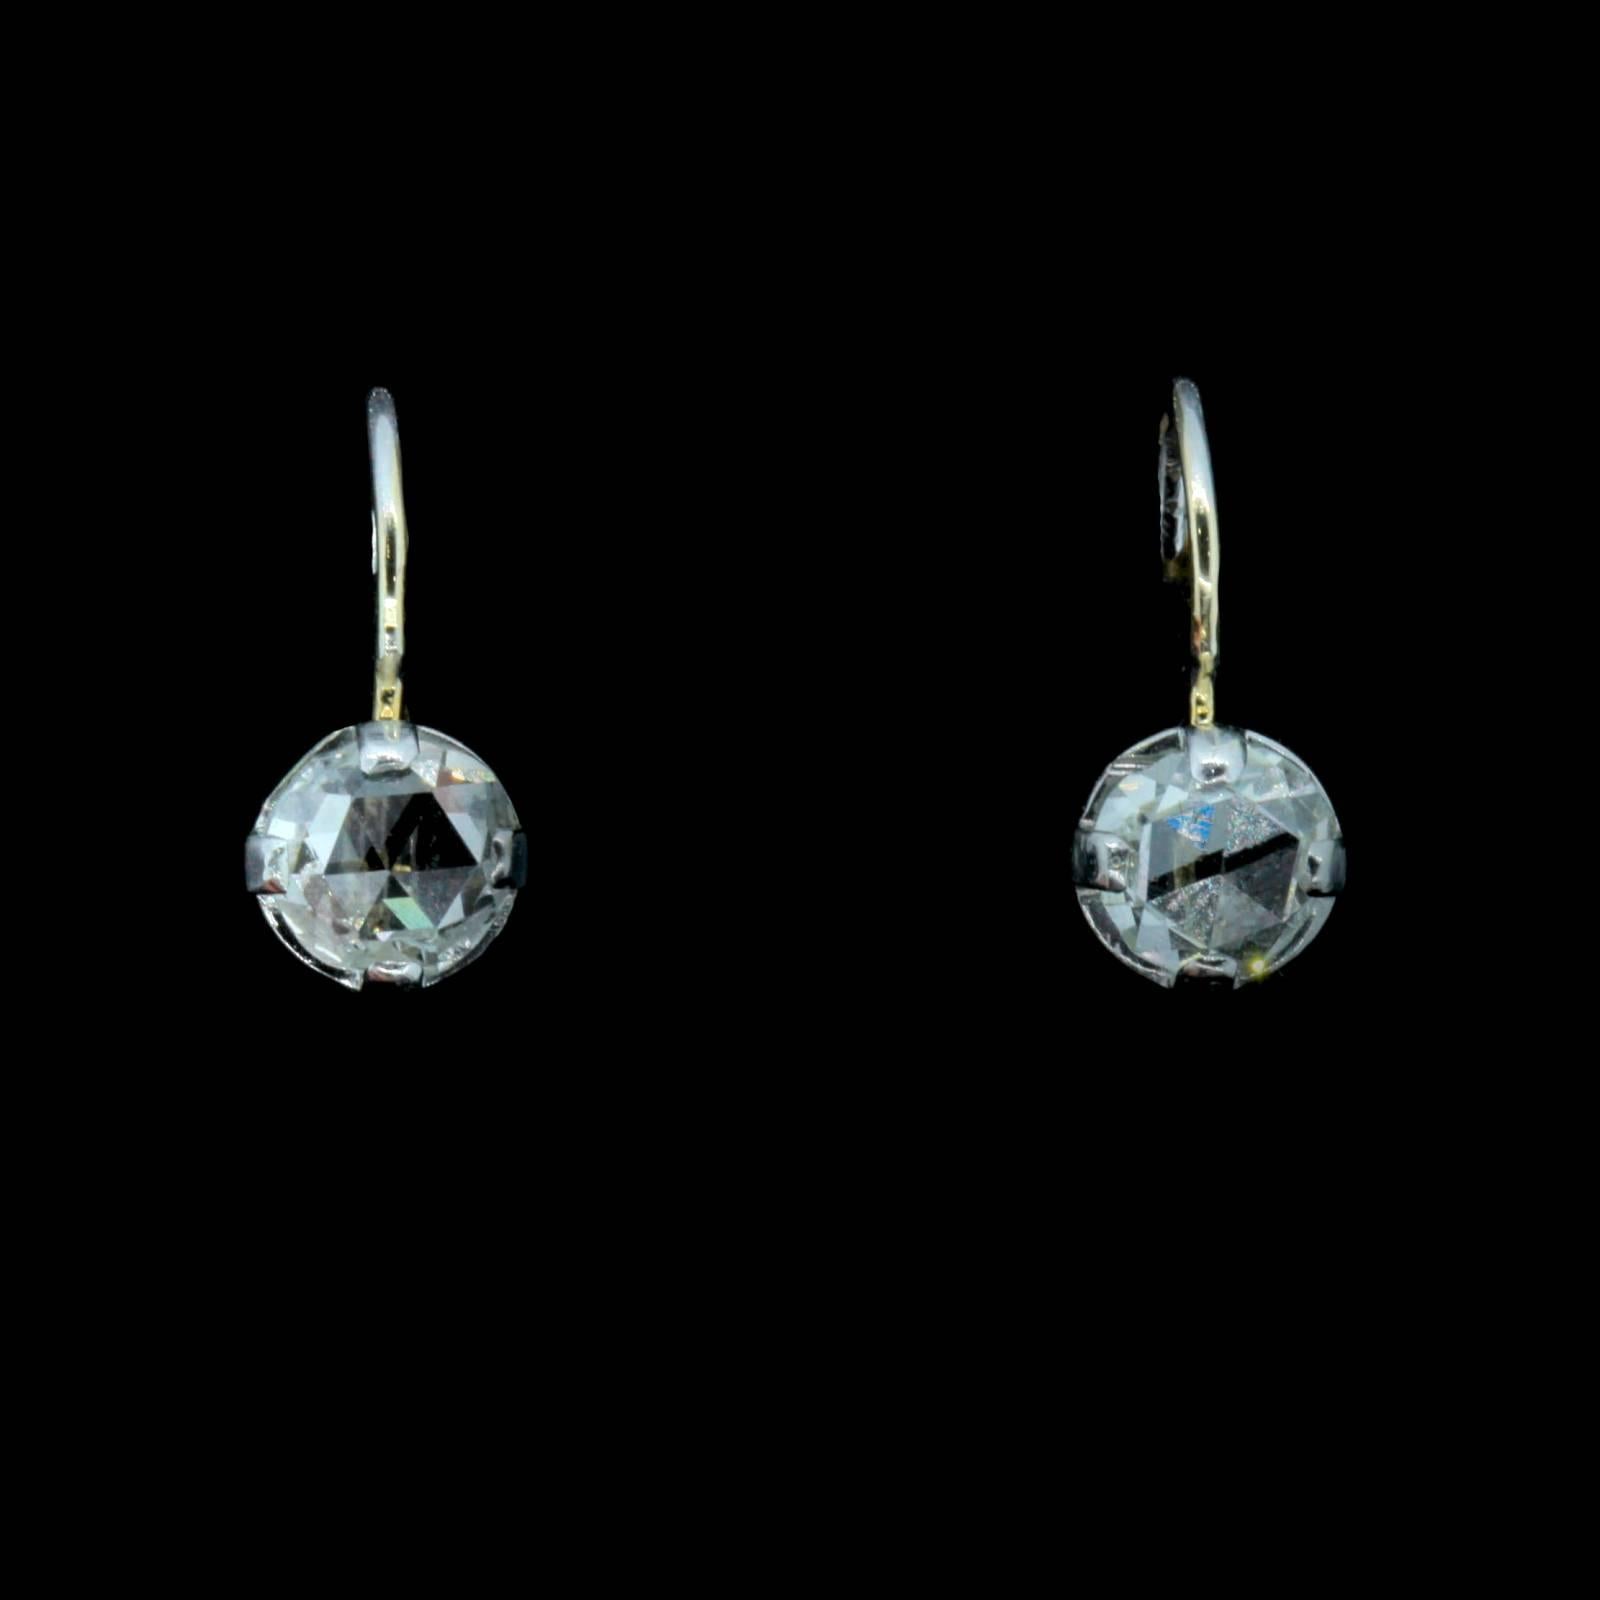 Simple and beautiful!  A pair of 14KT white gold earrings set with two Rose Cut Diamonds, both weigh a total of approx. 1.28 carats of I/J color - VS1/SI1 clarity.  The diamonds are set in a fluted four prong baskets with lever backs.  Just Lovely!